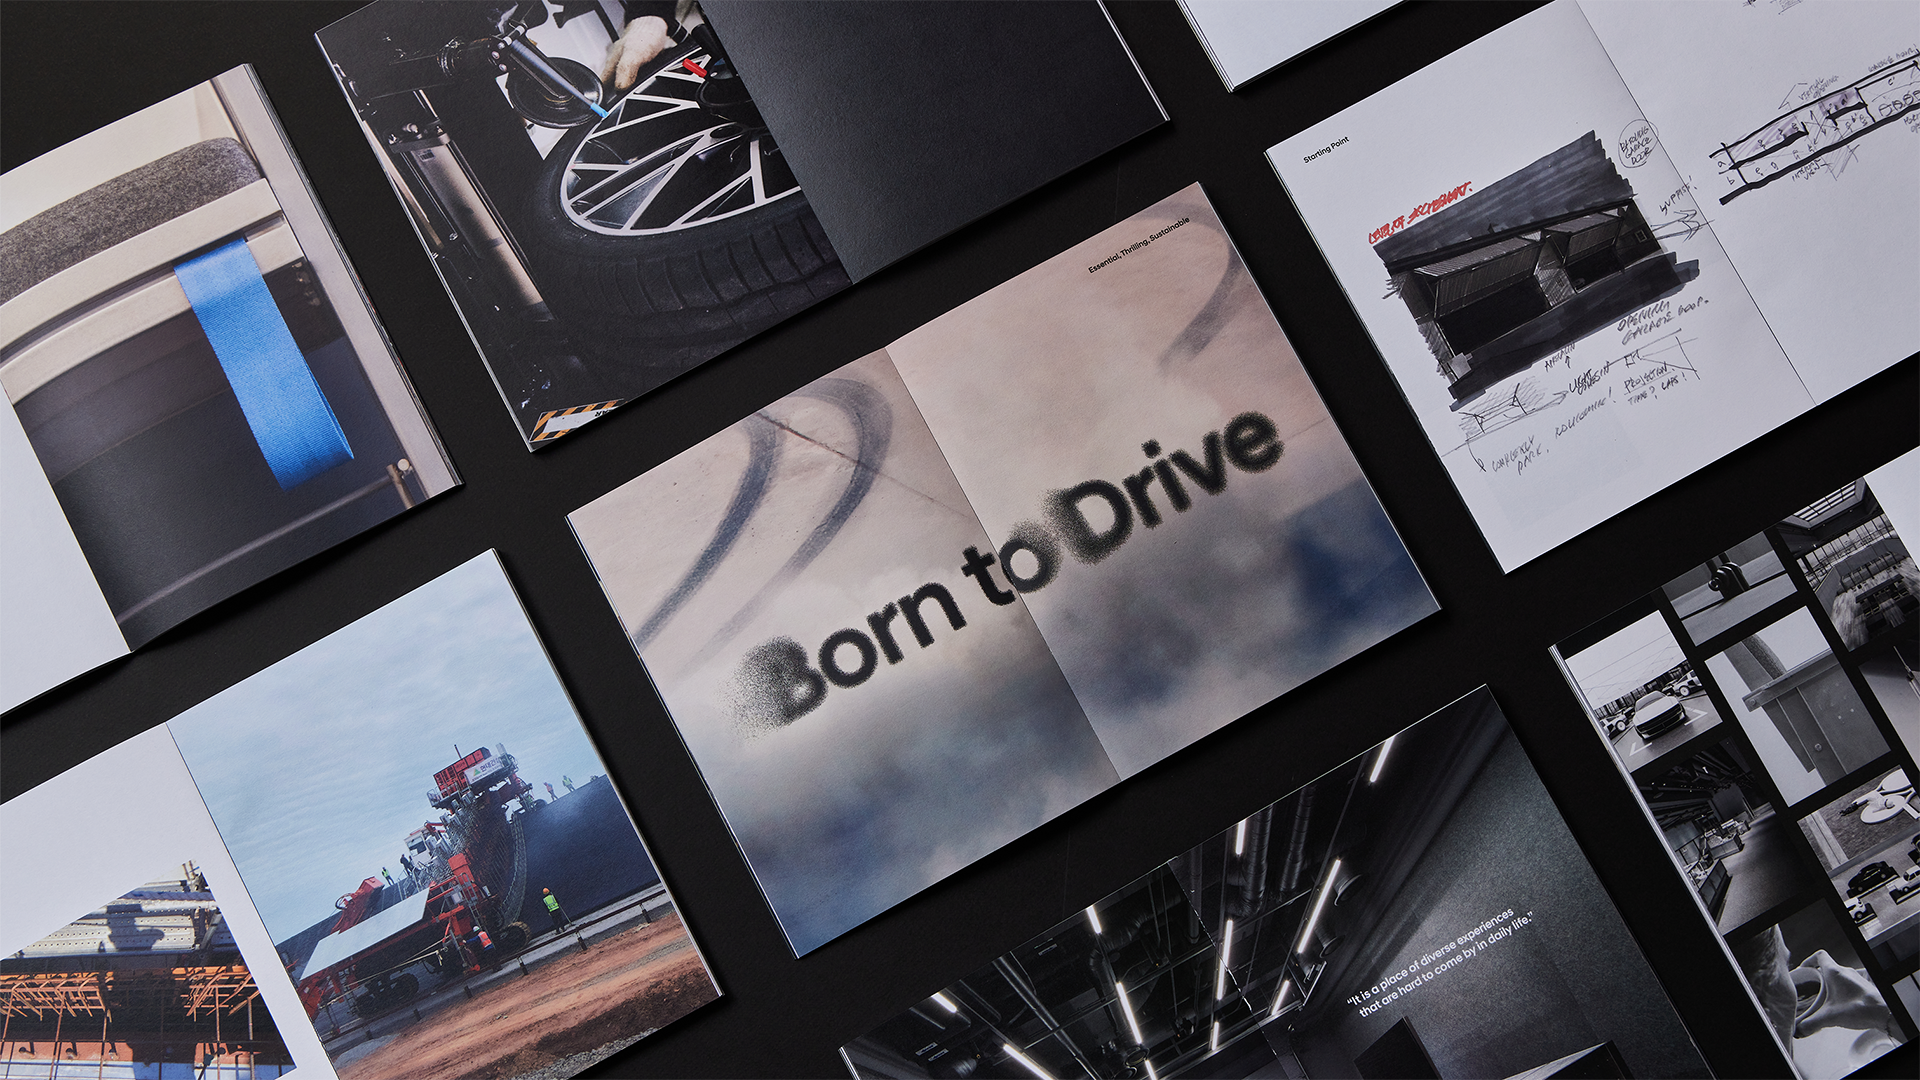 Born to Drive: The Driving Experience Center Book